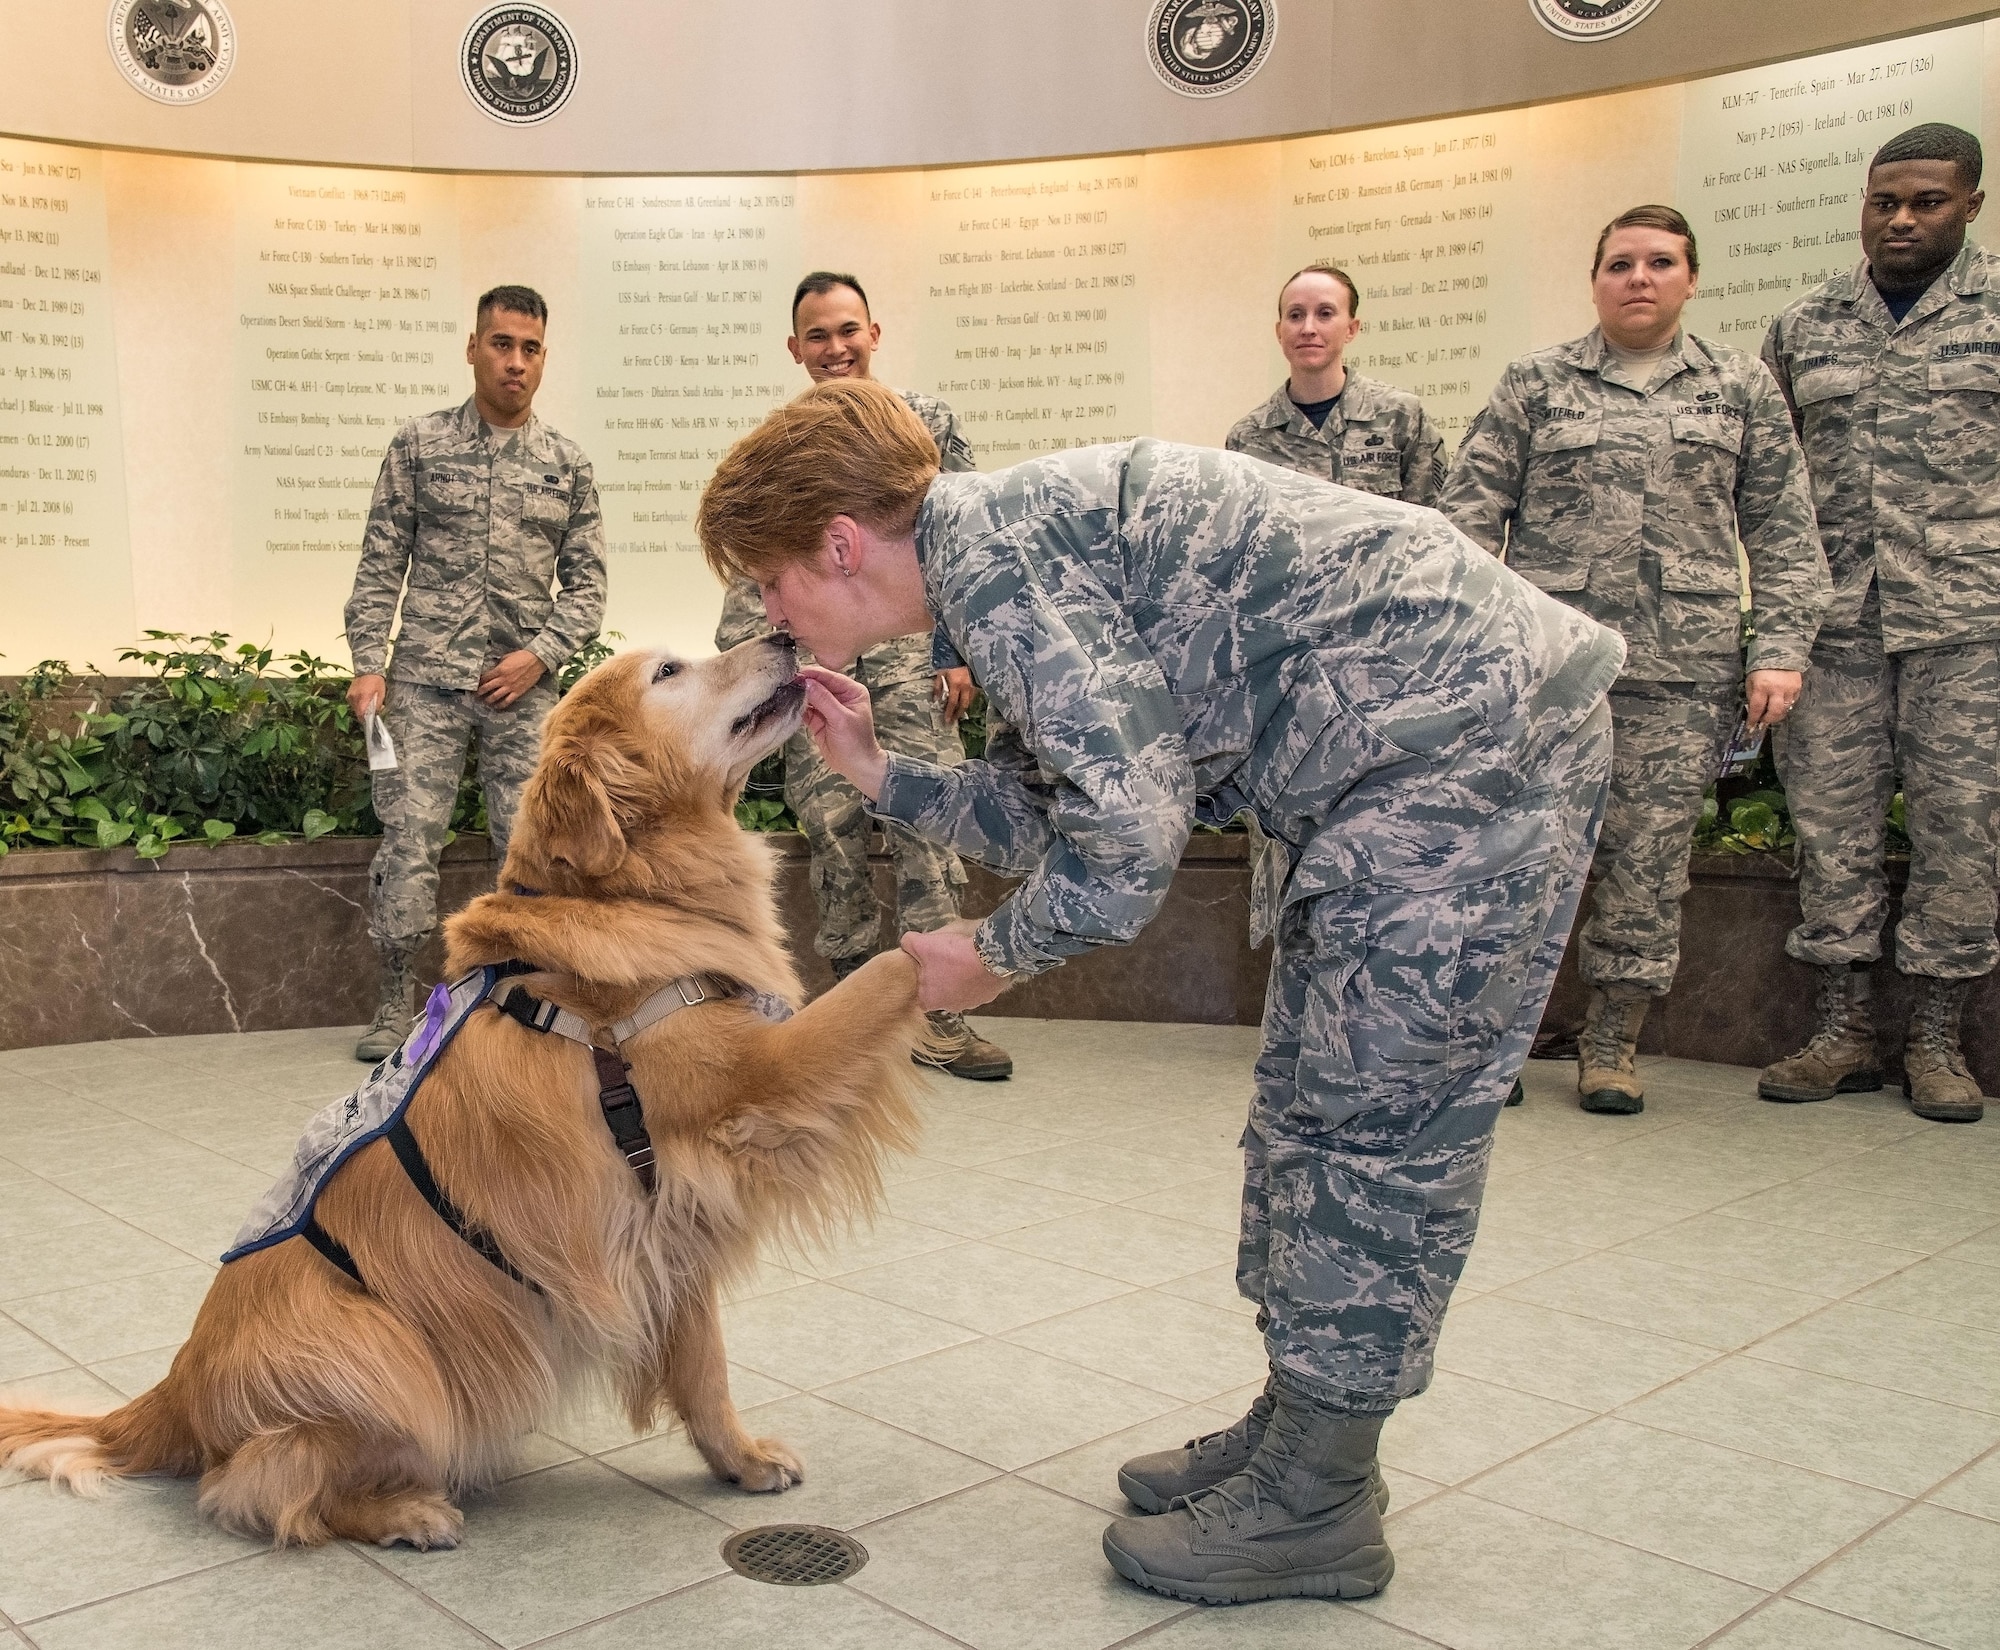 Col. Dawn Lancaster, Air Force Mortuary Affairs Operations commander, gives Lt. Col. Goldie a treat and a kiss on the nose during his visit with AFMAO personnel, Oct. 20, 2017, on Dover Air Force Base, Del. Goldie is a nine-year old Golden Retriever therapy dog stationed at Walter Reed National Military Medical Center, Bethesda, Md., came to the base to be part of the 436th Medical Operations Squadron Family Advocacy’s Domestic Violence Awareness Month outreach. (U.S. Air Force photo by Roland Balik)